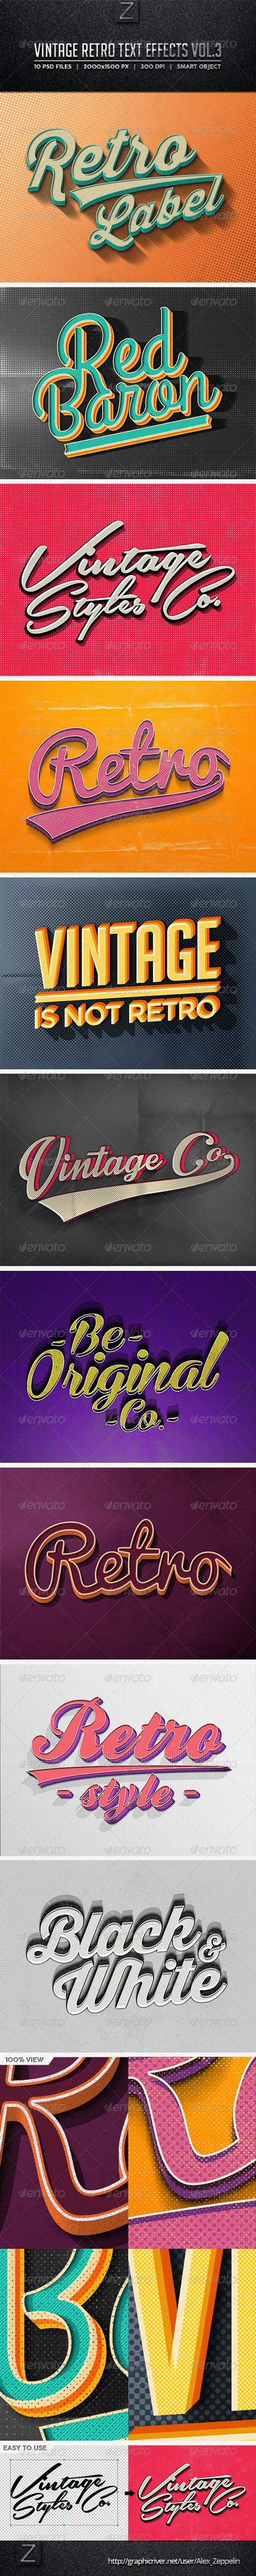 Vintage Text Effects Vol.3 8597636